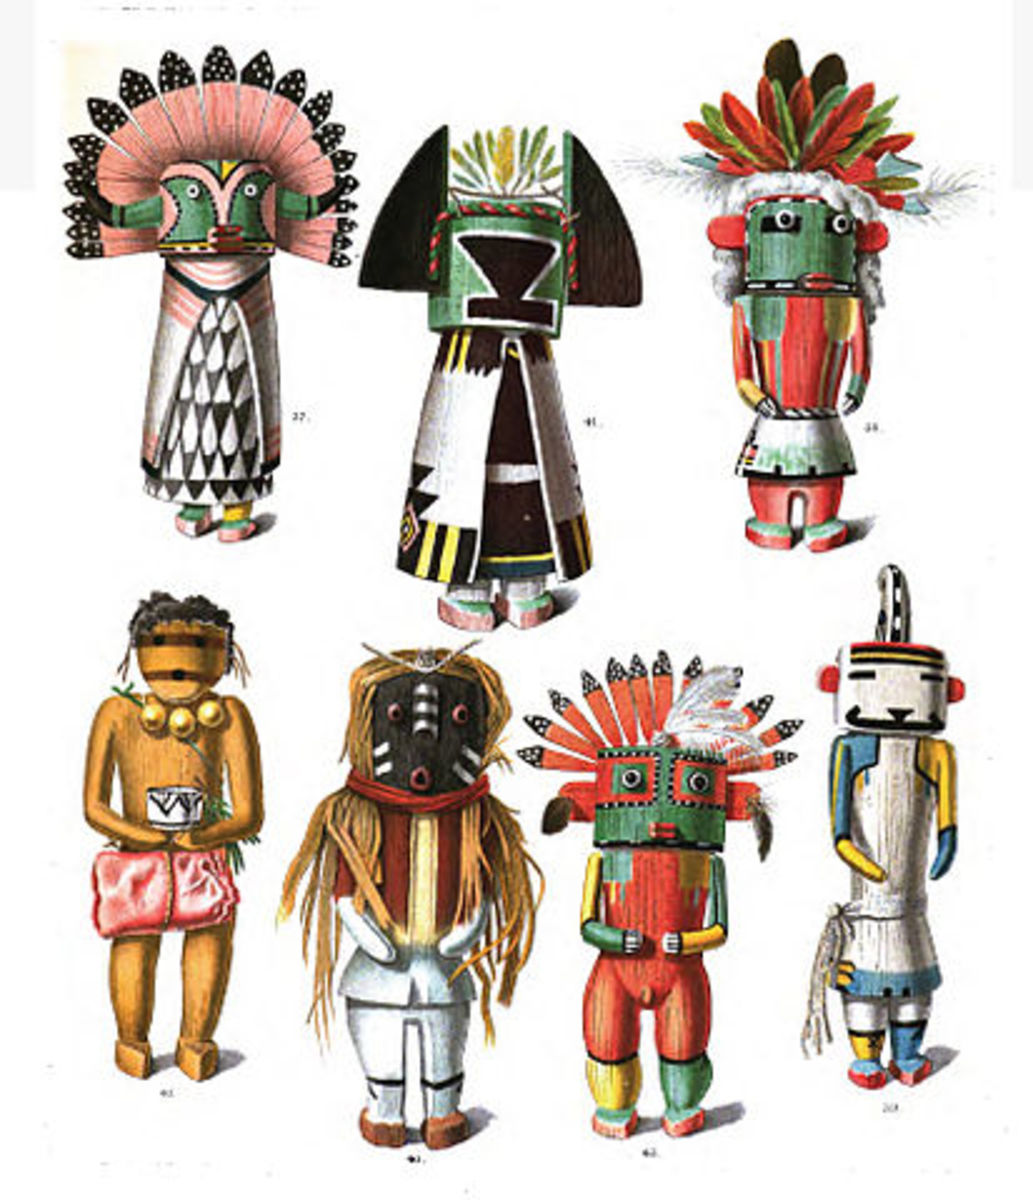 Drawings of kachina dolls, from an 1894 anthropology book, by Jesse Walter Fewkes 